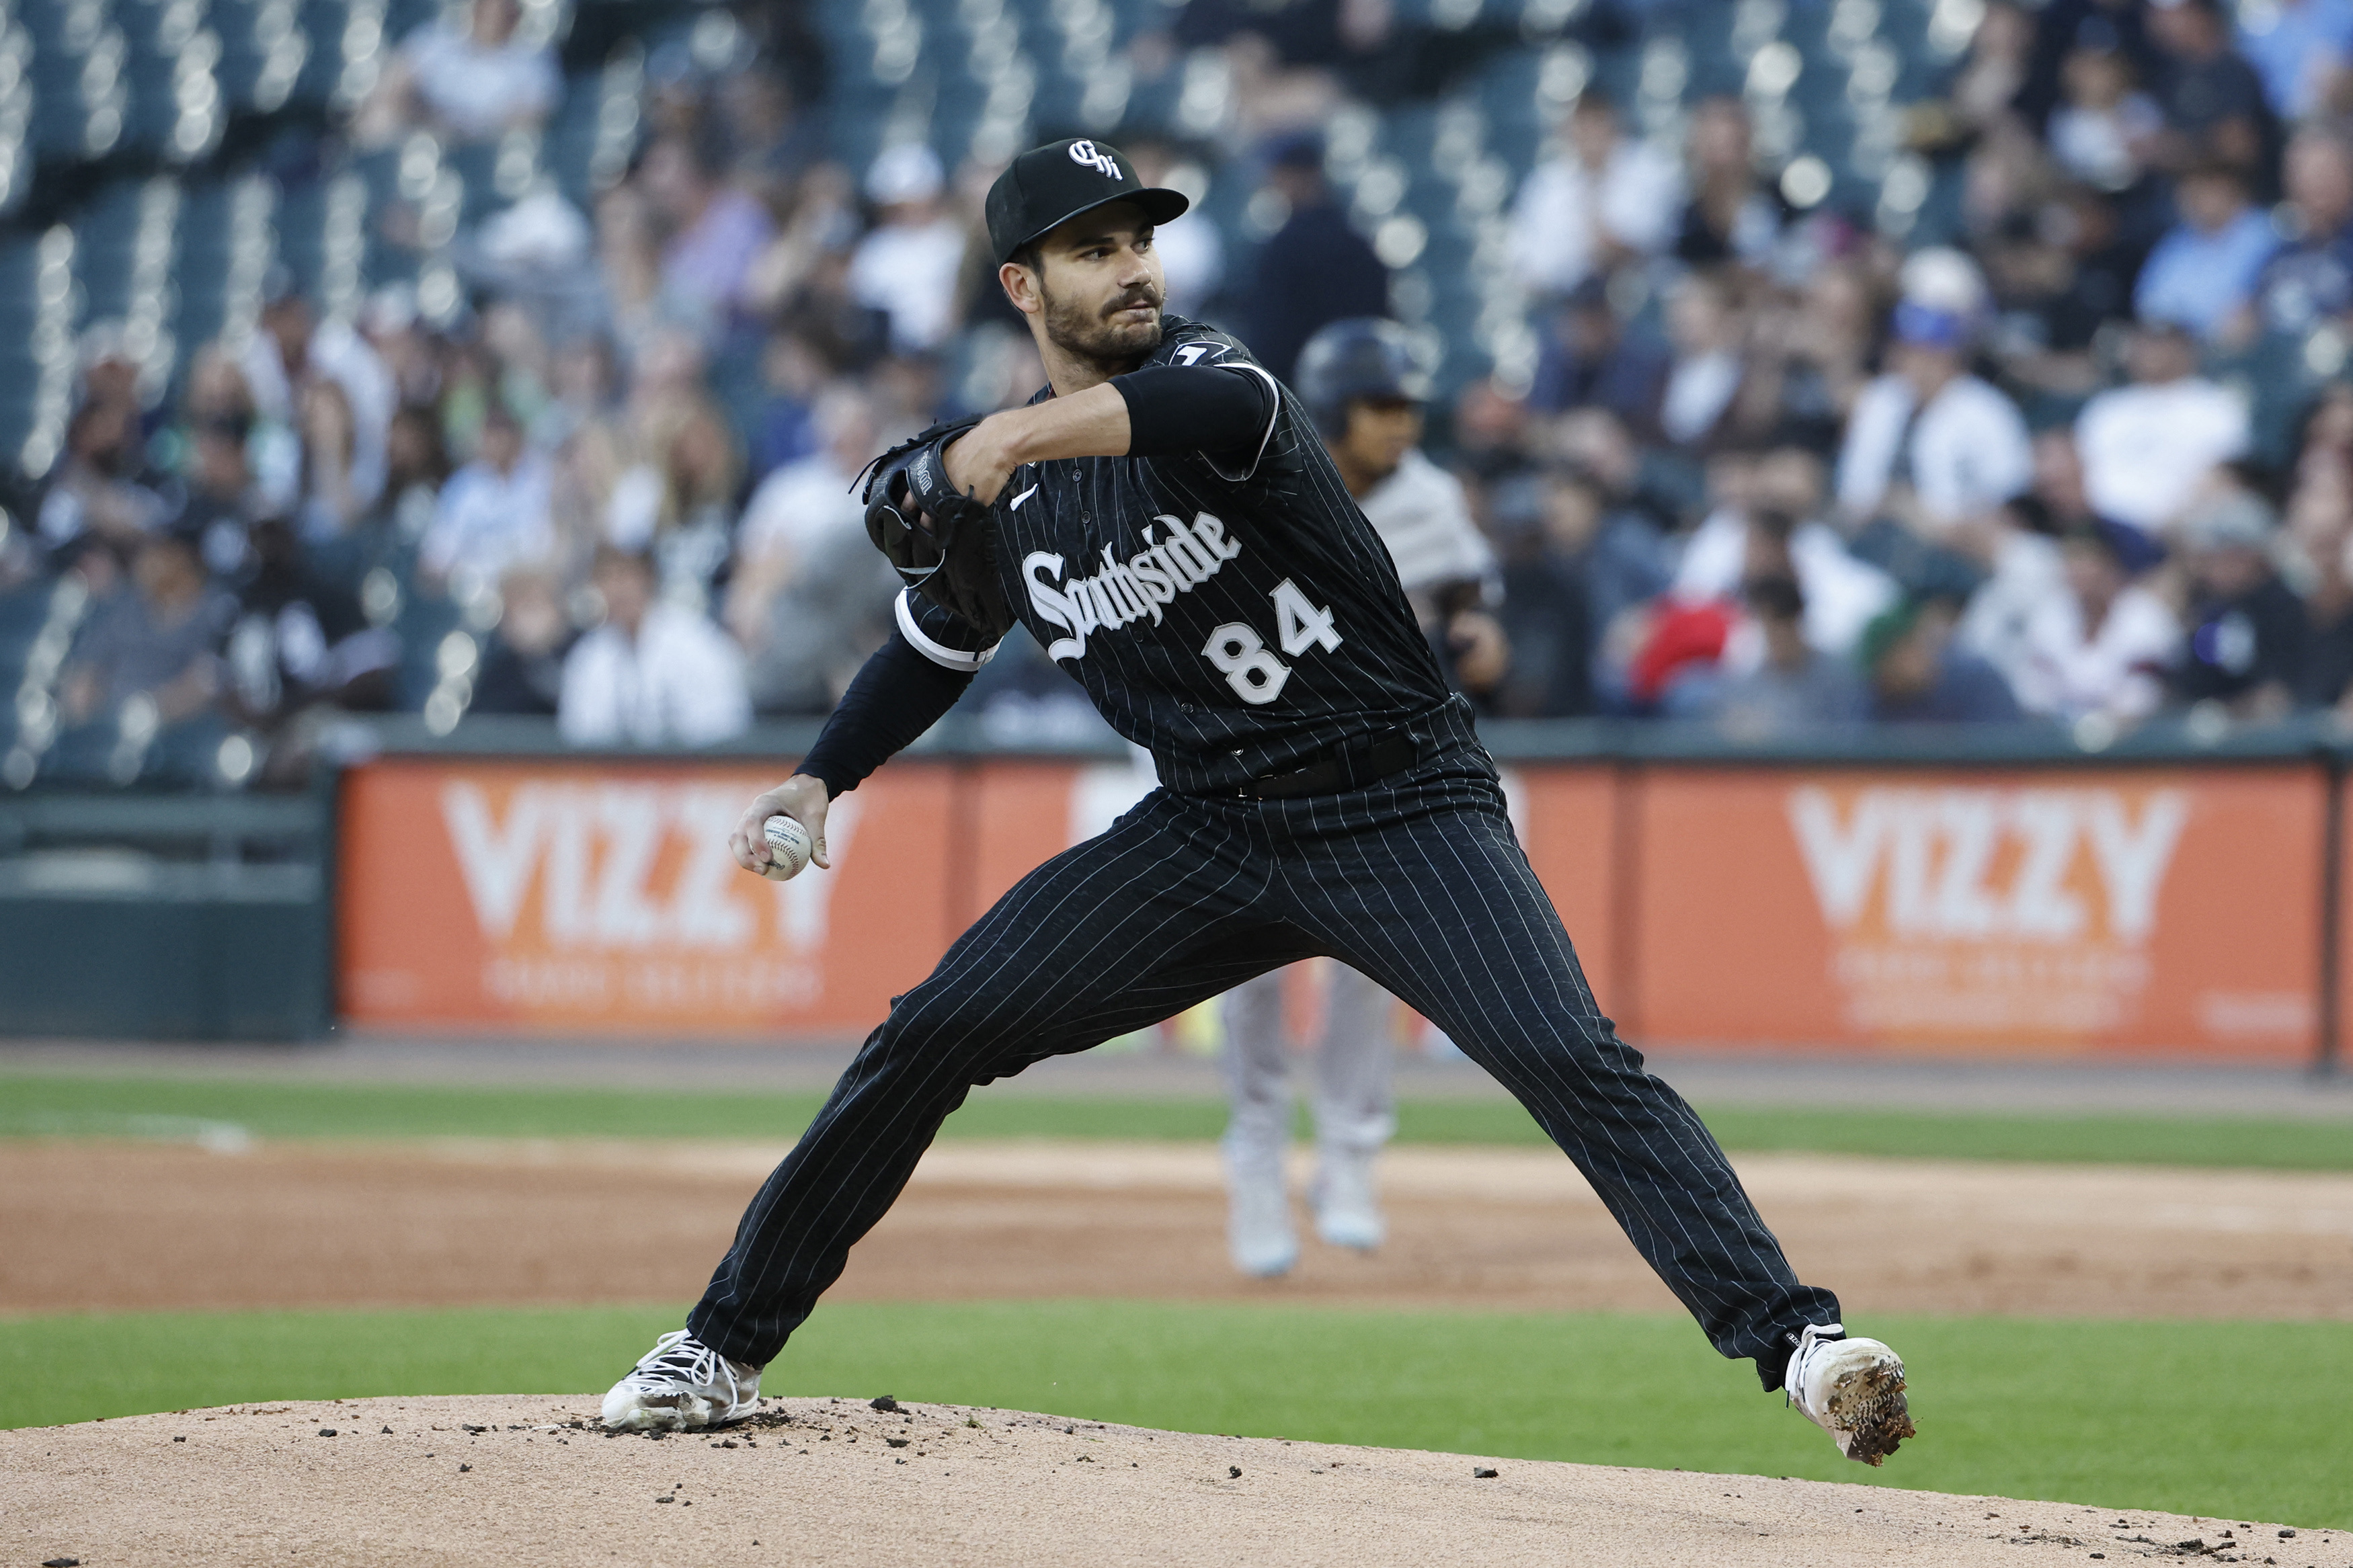 White Sox register MLB-best 6th walk-off win over Marlins